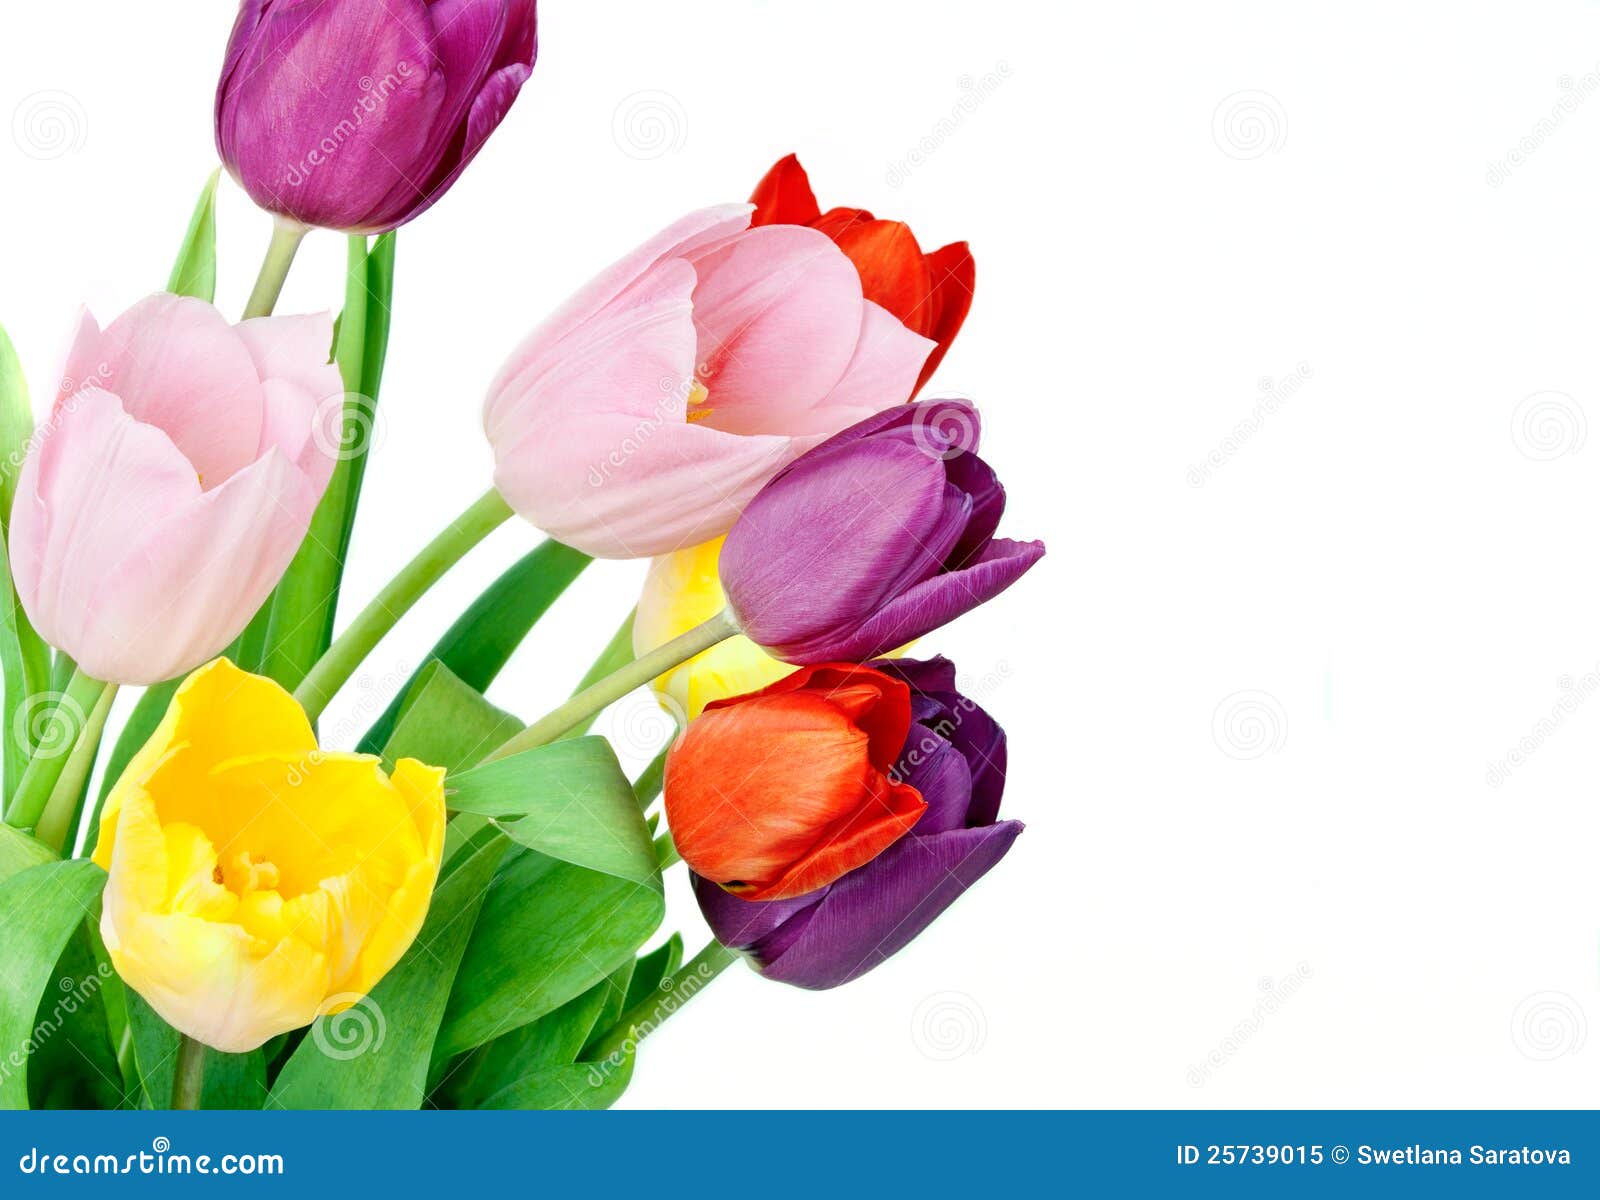 Spring Tulip Flowers bunch stock image. Image of isolate - 25739015